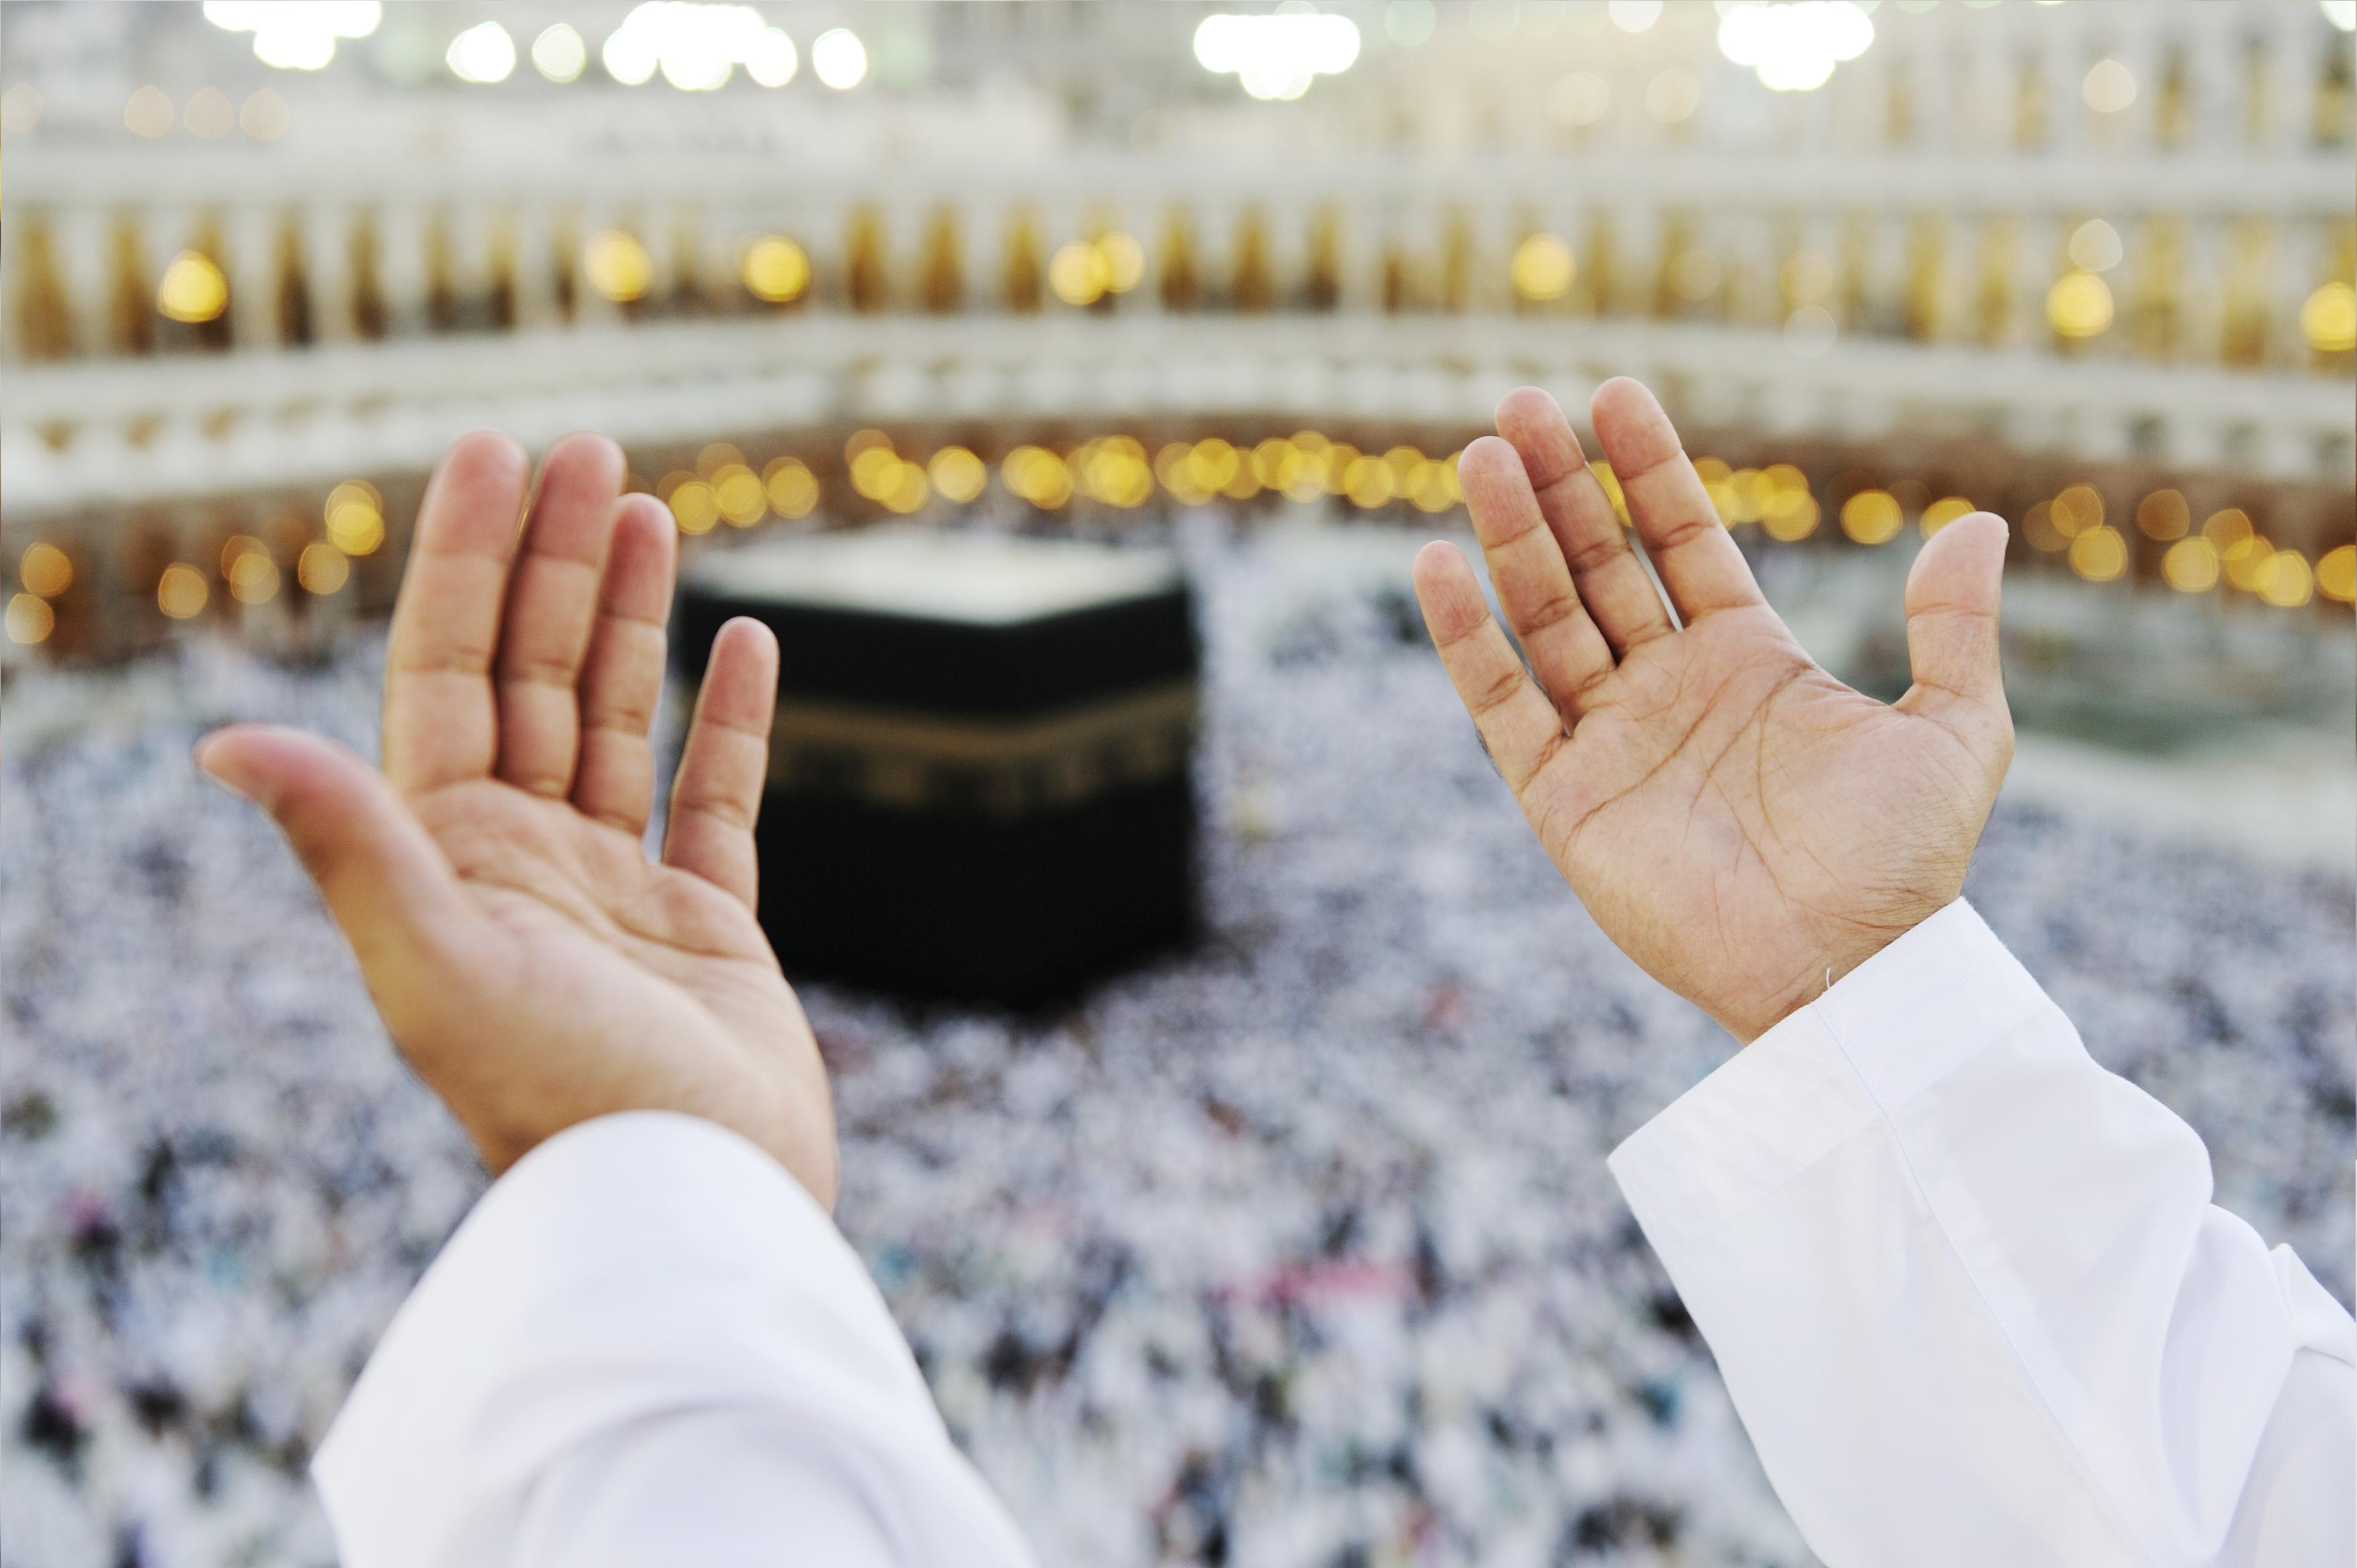 What is Dhul Hijjah?